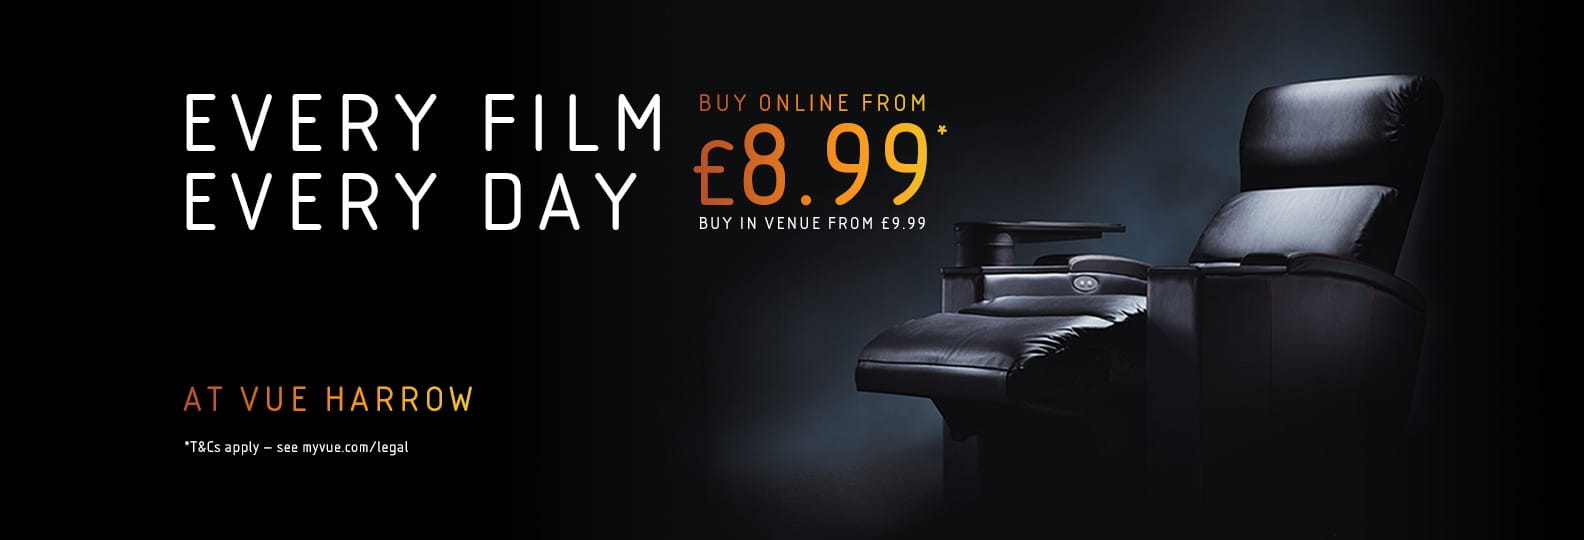 Every Day, Every Film from £8.99 at Vue Harrow